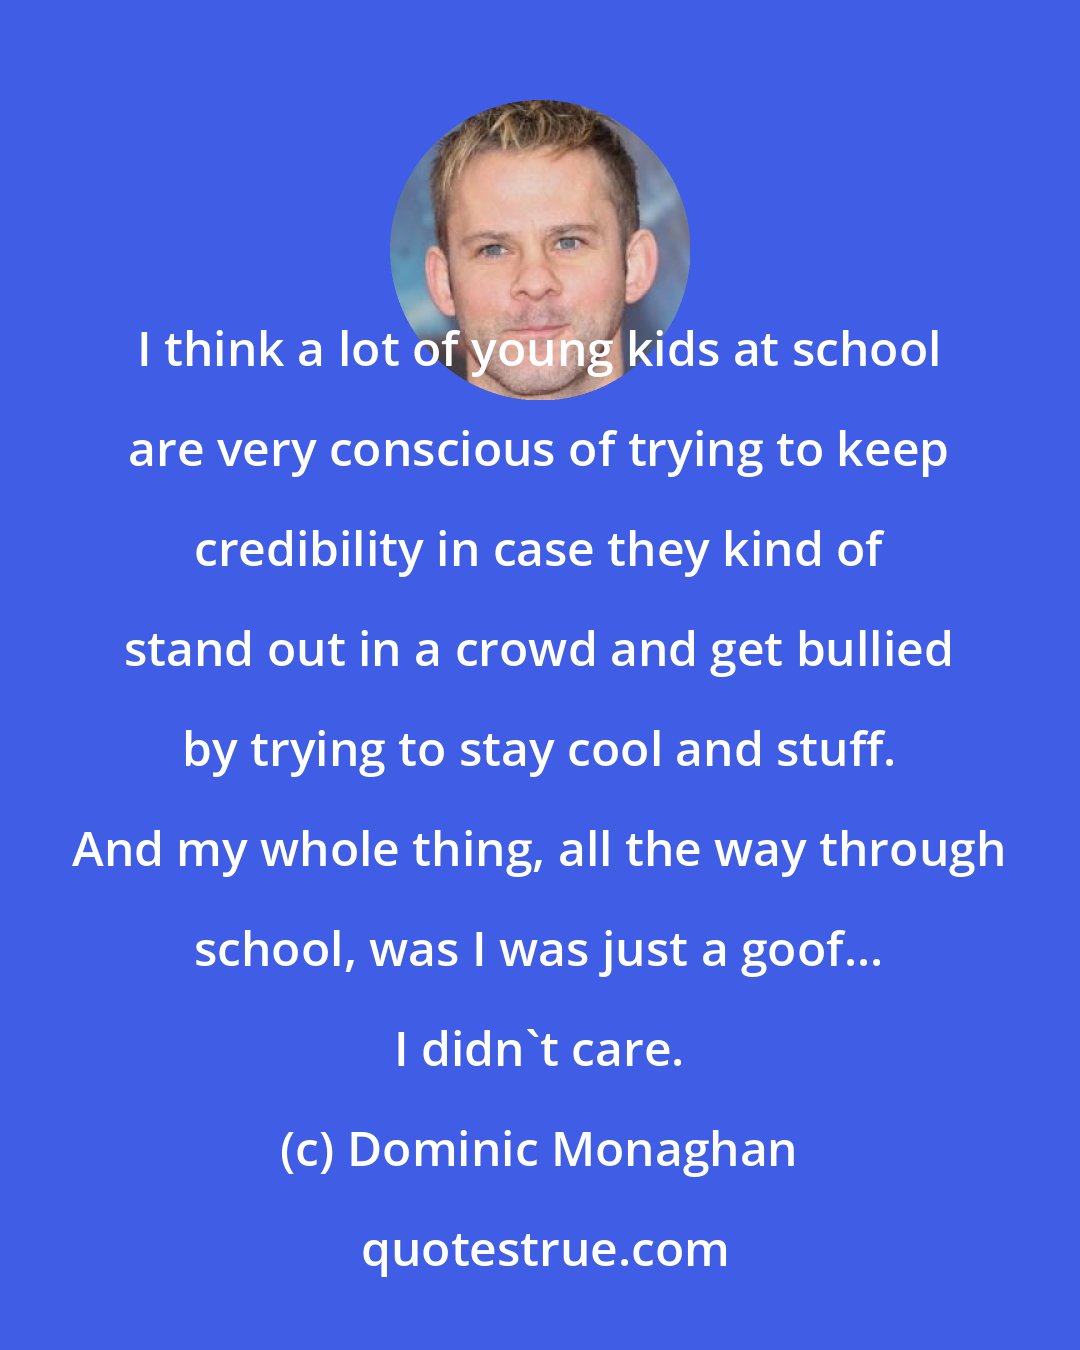 Dominic Monaghan: I think a lot of young kids at school are very conscious of trying to keep credibility in case they kind of stand out in a crowd and get bullied by trying to stay cool and stuff. And my whole thing, all the way through school, was I was just a goof... I didn't care.